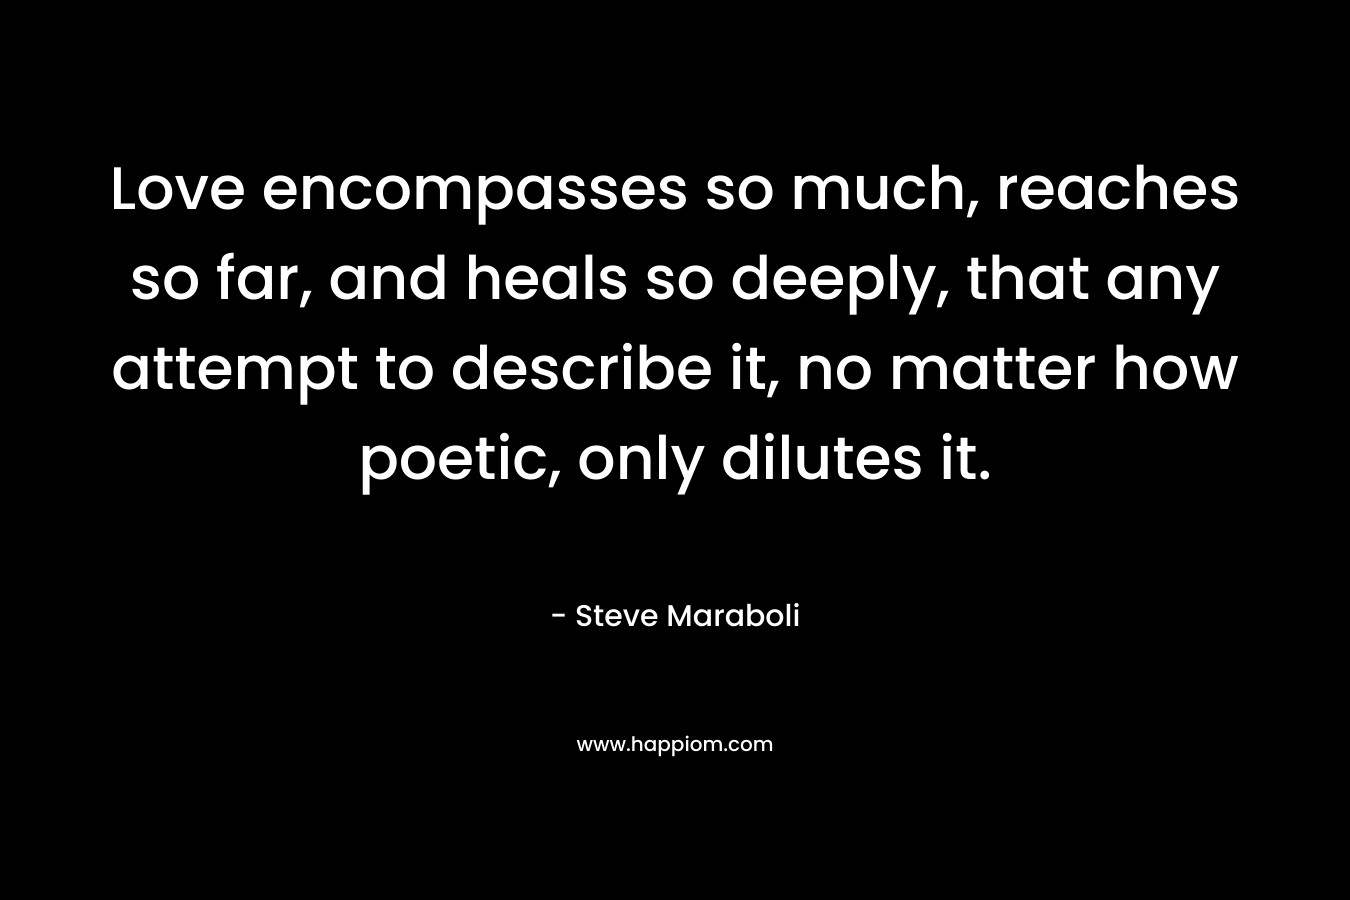 Love encompasses so much, reaches so far, and heals so deeply, that any attempt to describe it, no matter how poetic, only dilutes it. – Steve Maraboli